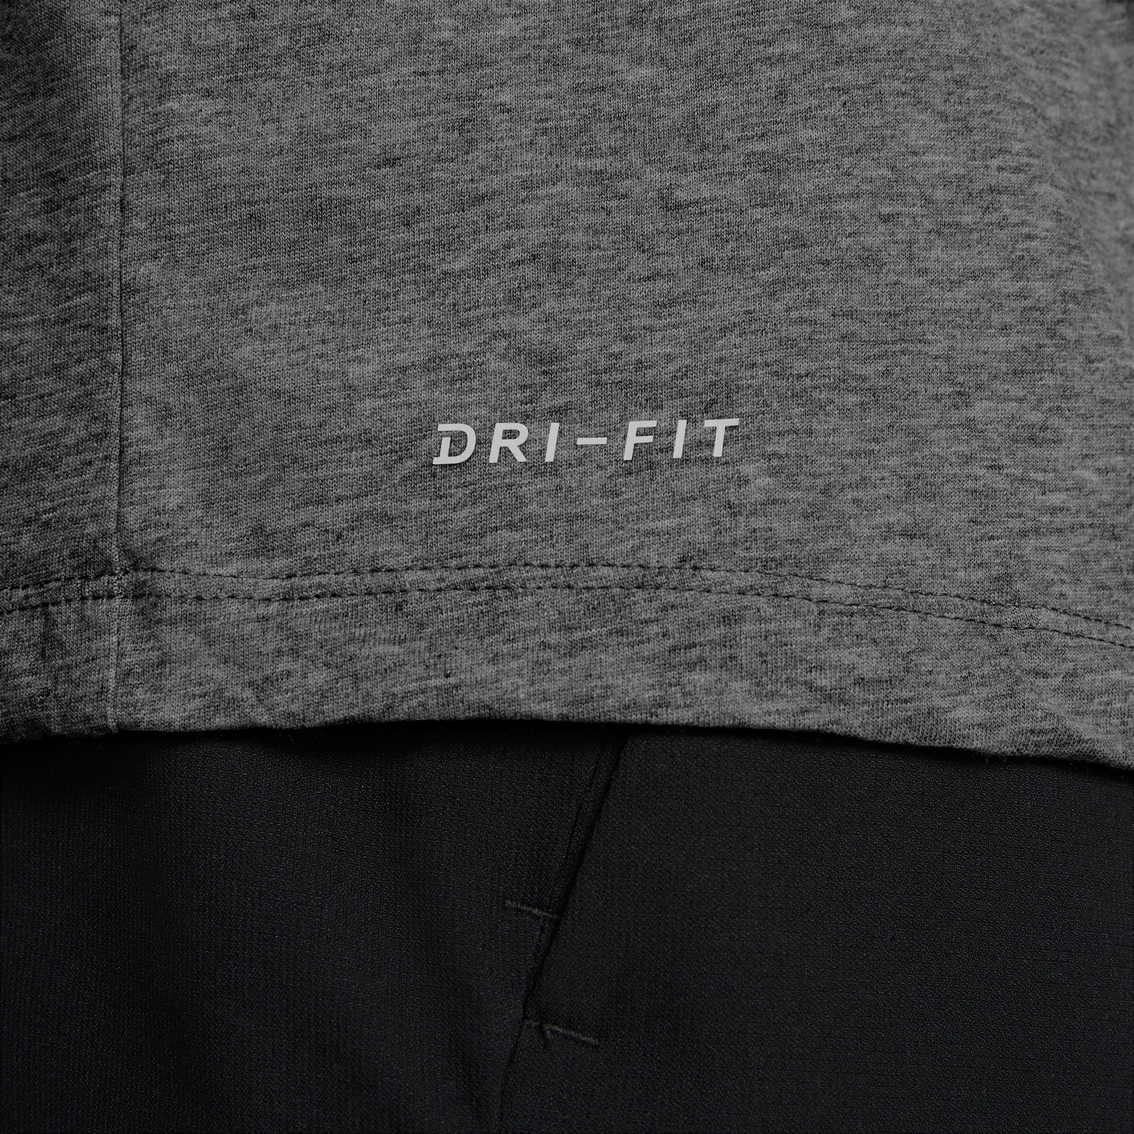 Nike Dri Fit Cotton Crew Tee | Shirts | Clothing & Accessories | Shop ...